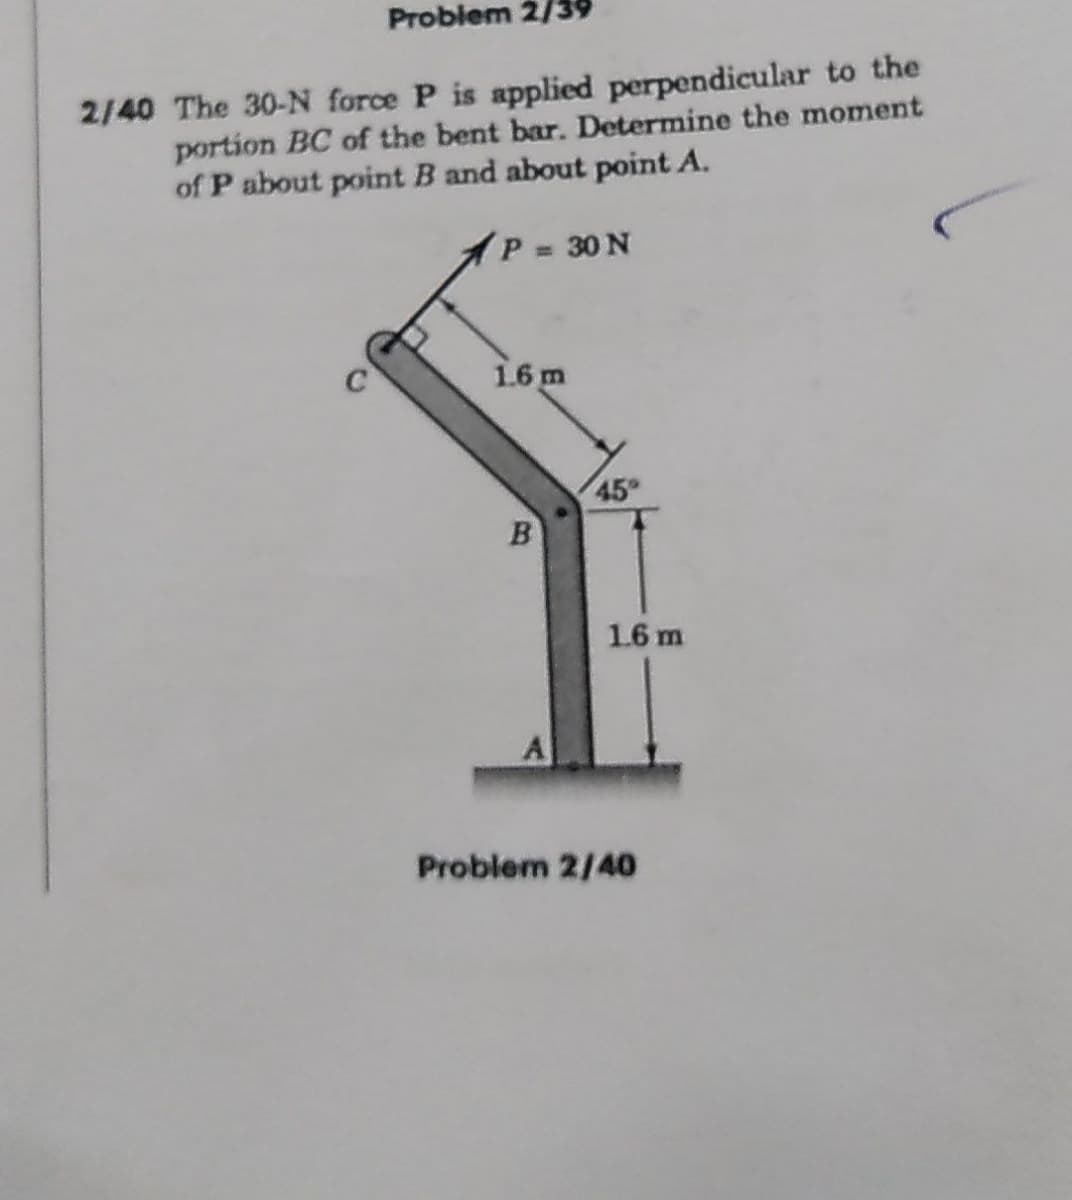 Problem 2/39
2/40 The 30-N force P is applied perpendicular to the
portion BC of the bent bar. Determine the moment
of P about point B and about point A.
1P 30 N
%3D
1.6 m
45
1.6 m
Problem 2/40
